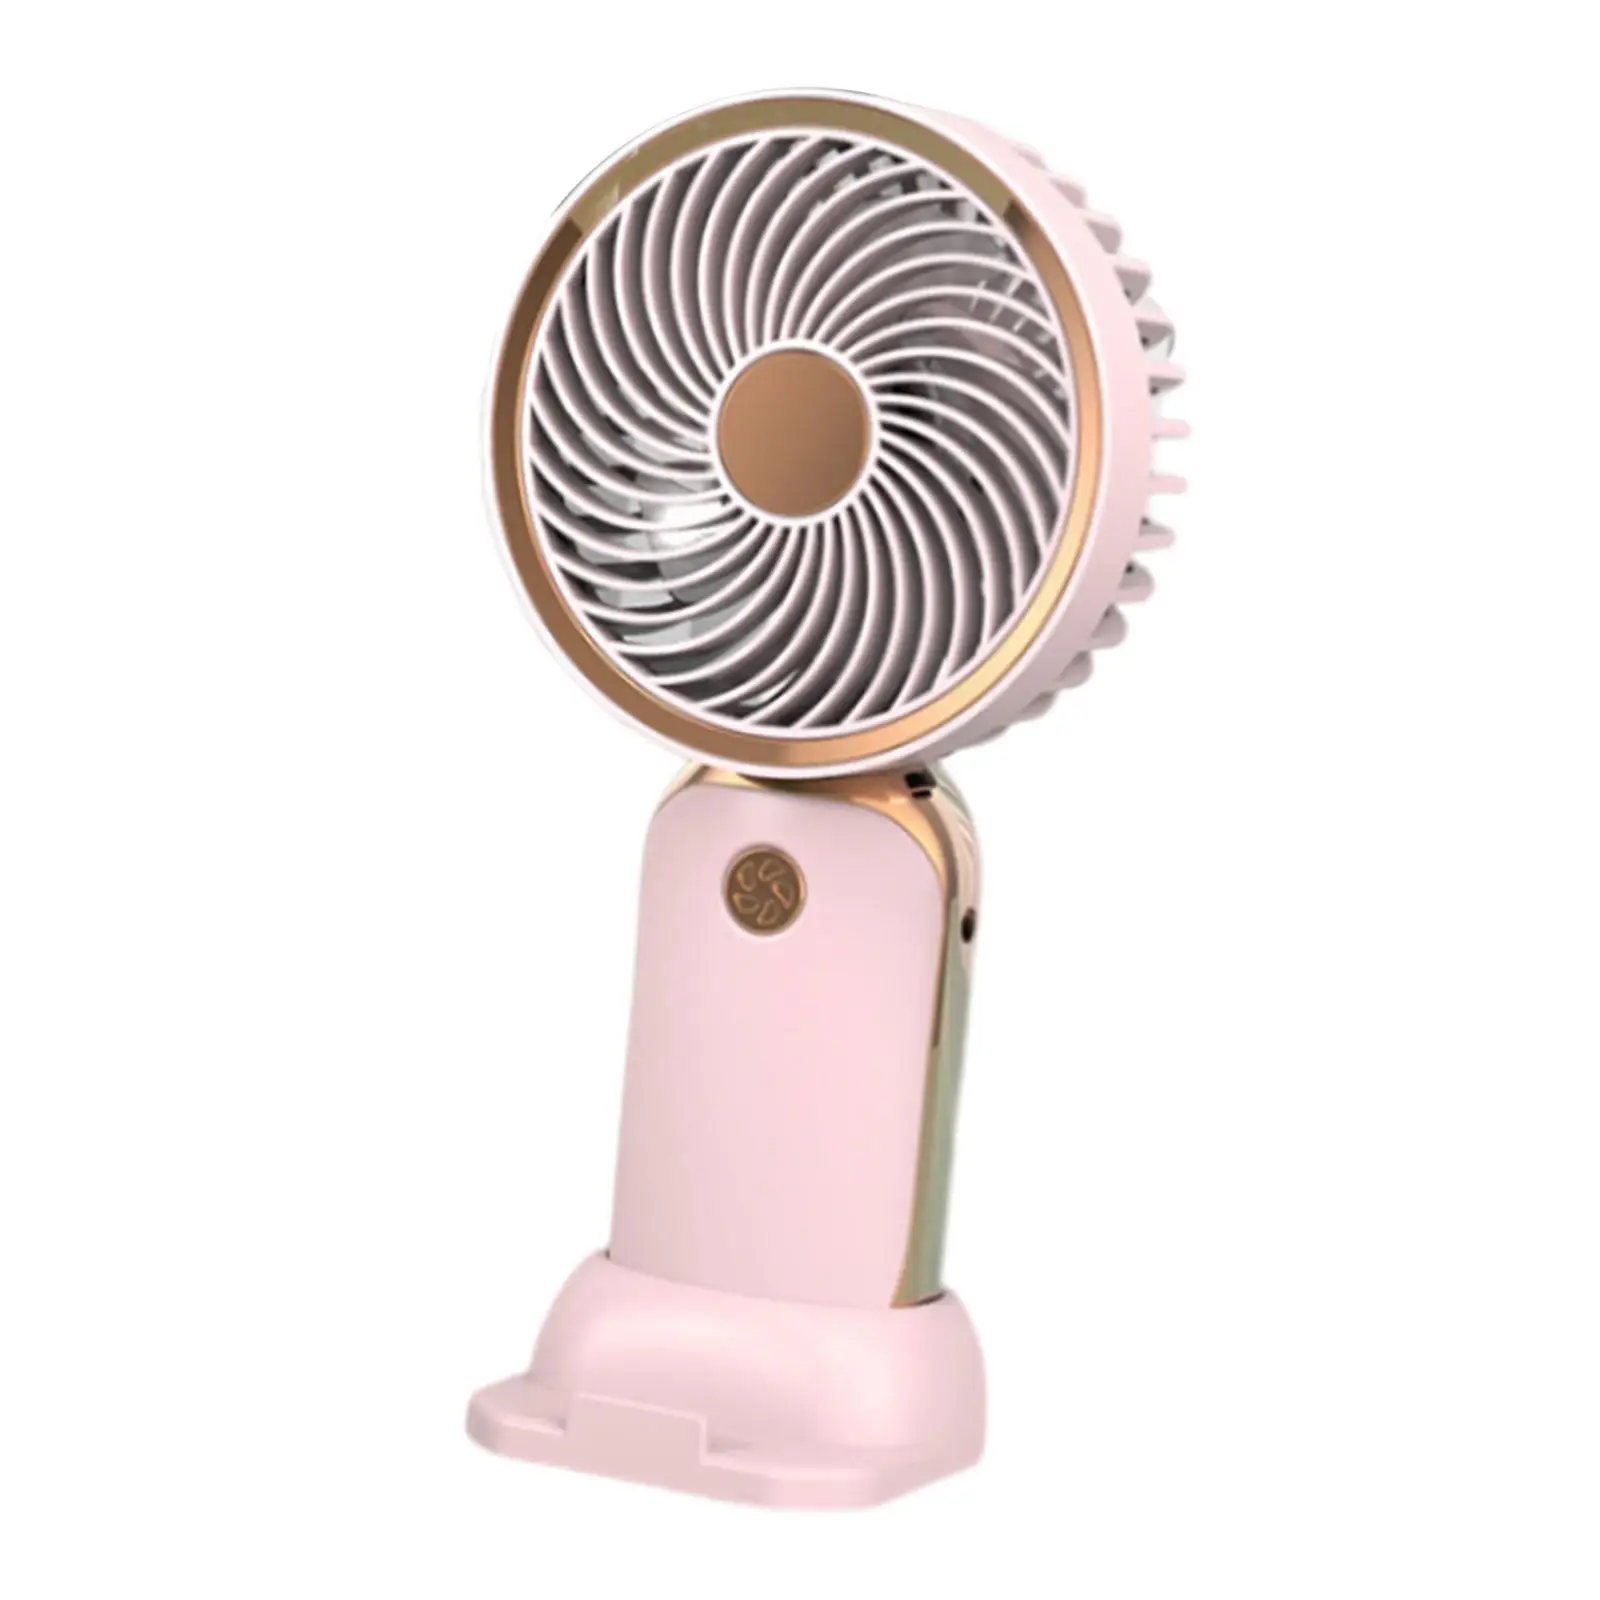 Mini Hand Held Fan for Camping or Playing Sports Powerful Multifunctional Hand Held Personal Fan for Traveling Backpacking Beach